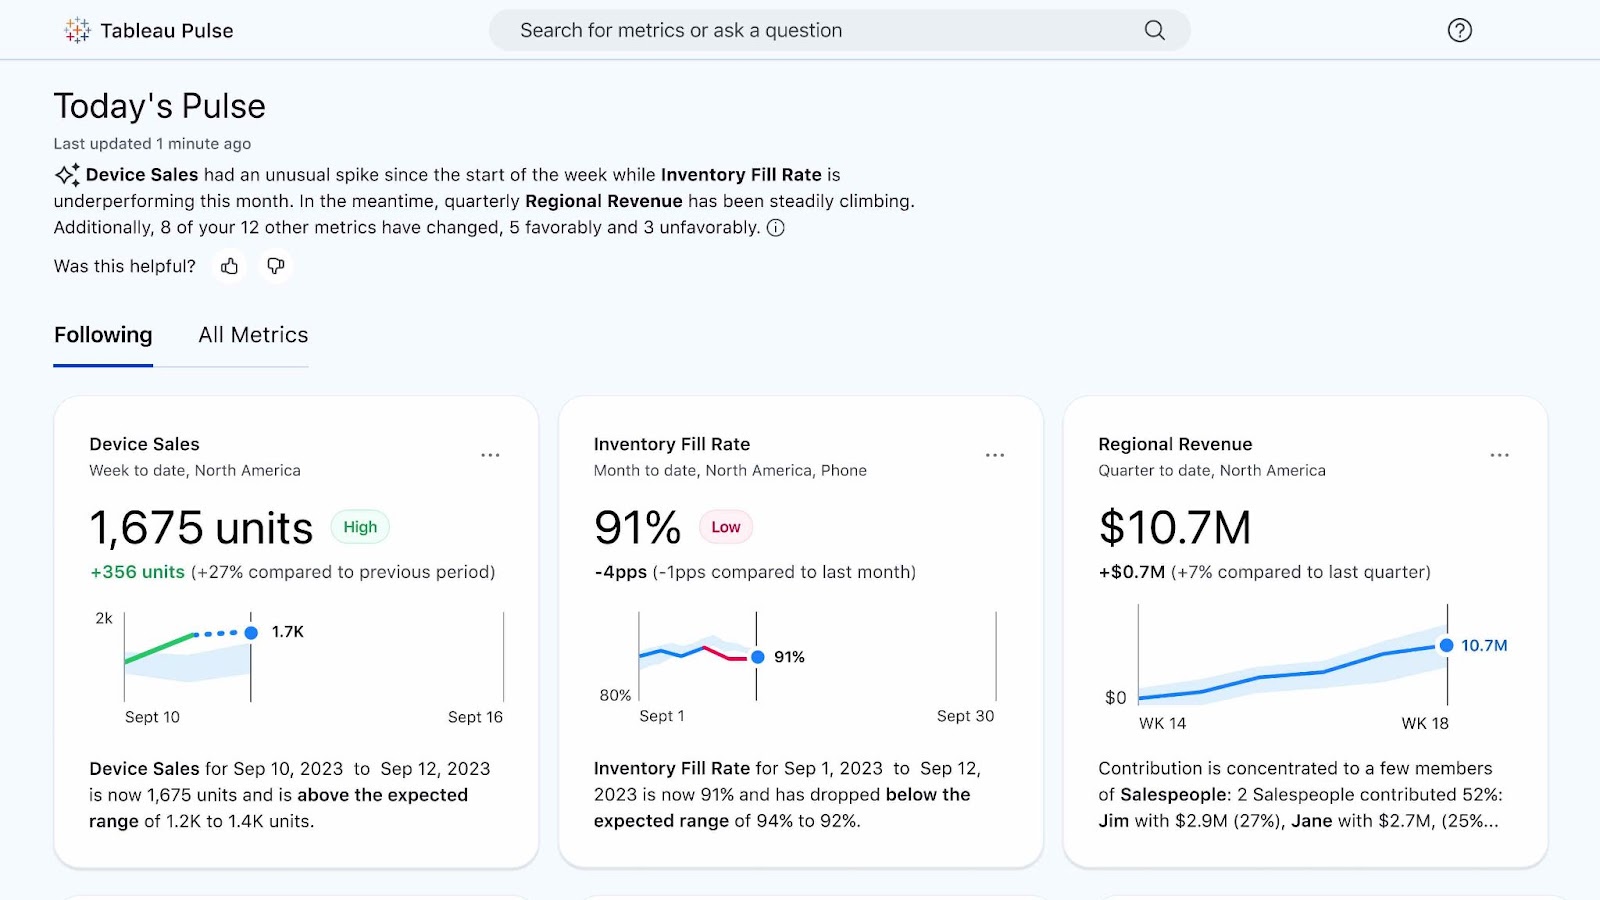 "Tableau Pulse" with a summary of recent performance & charts on metrics like sales, inventory fill rate, and revenue.